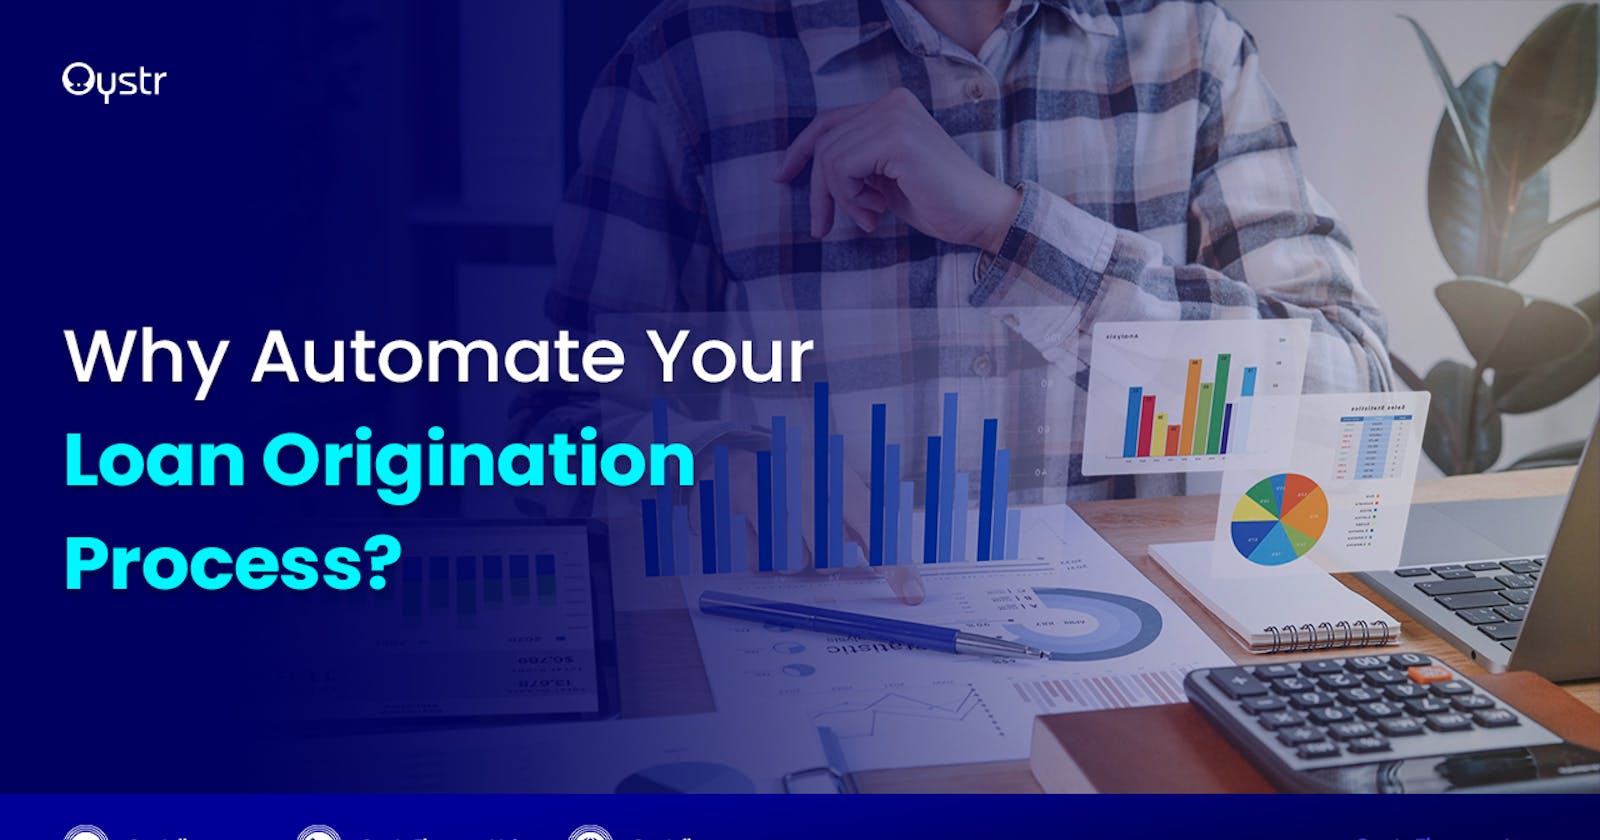 Why Automate Your Loan Origination Process